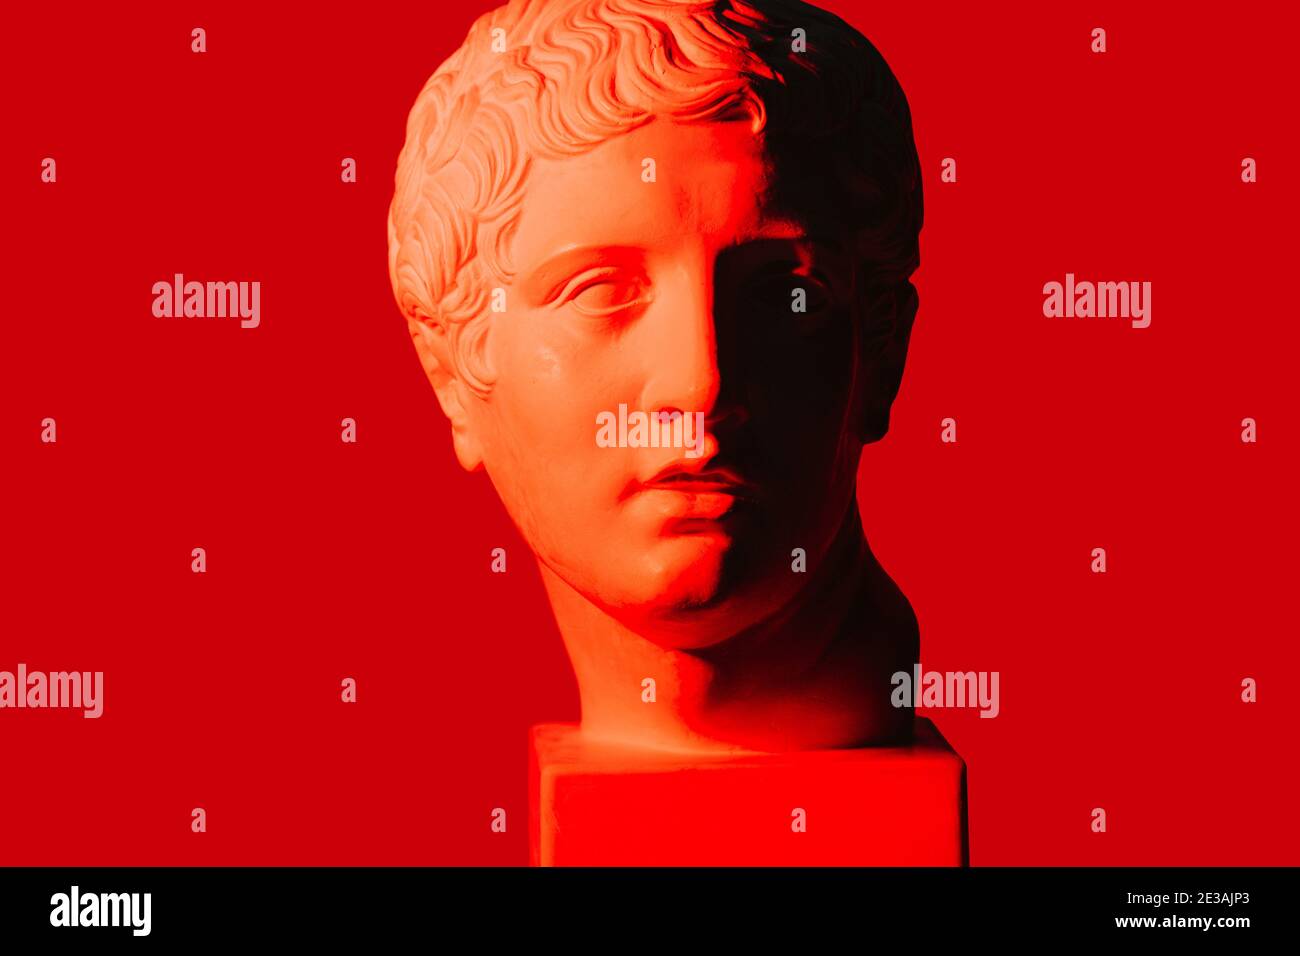 Red-lit half-shaded marble head of young man over red background. Stock Photo